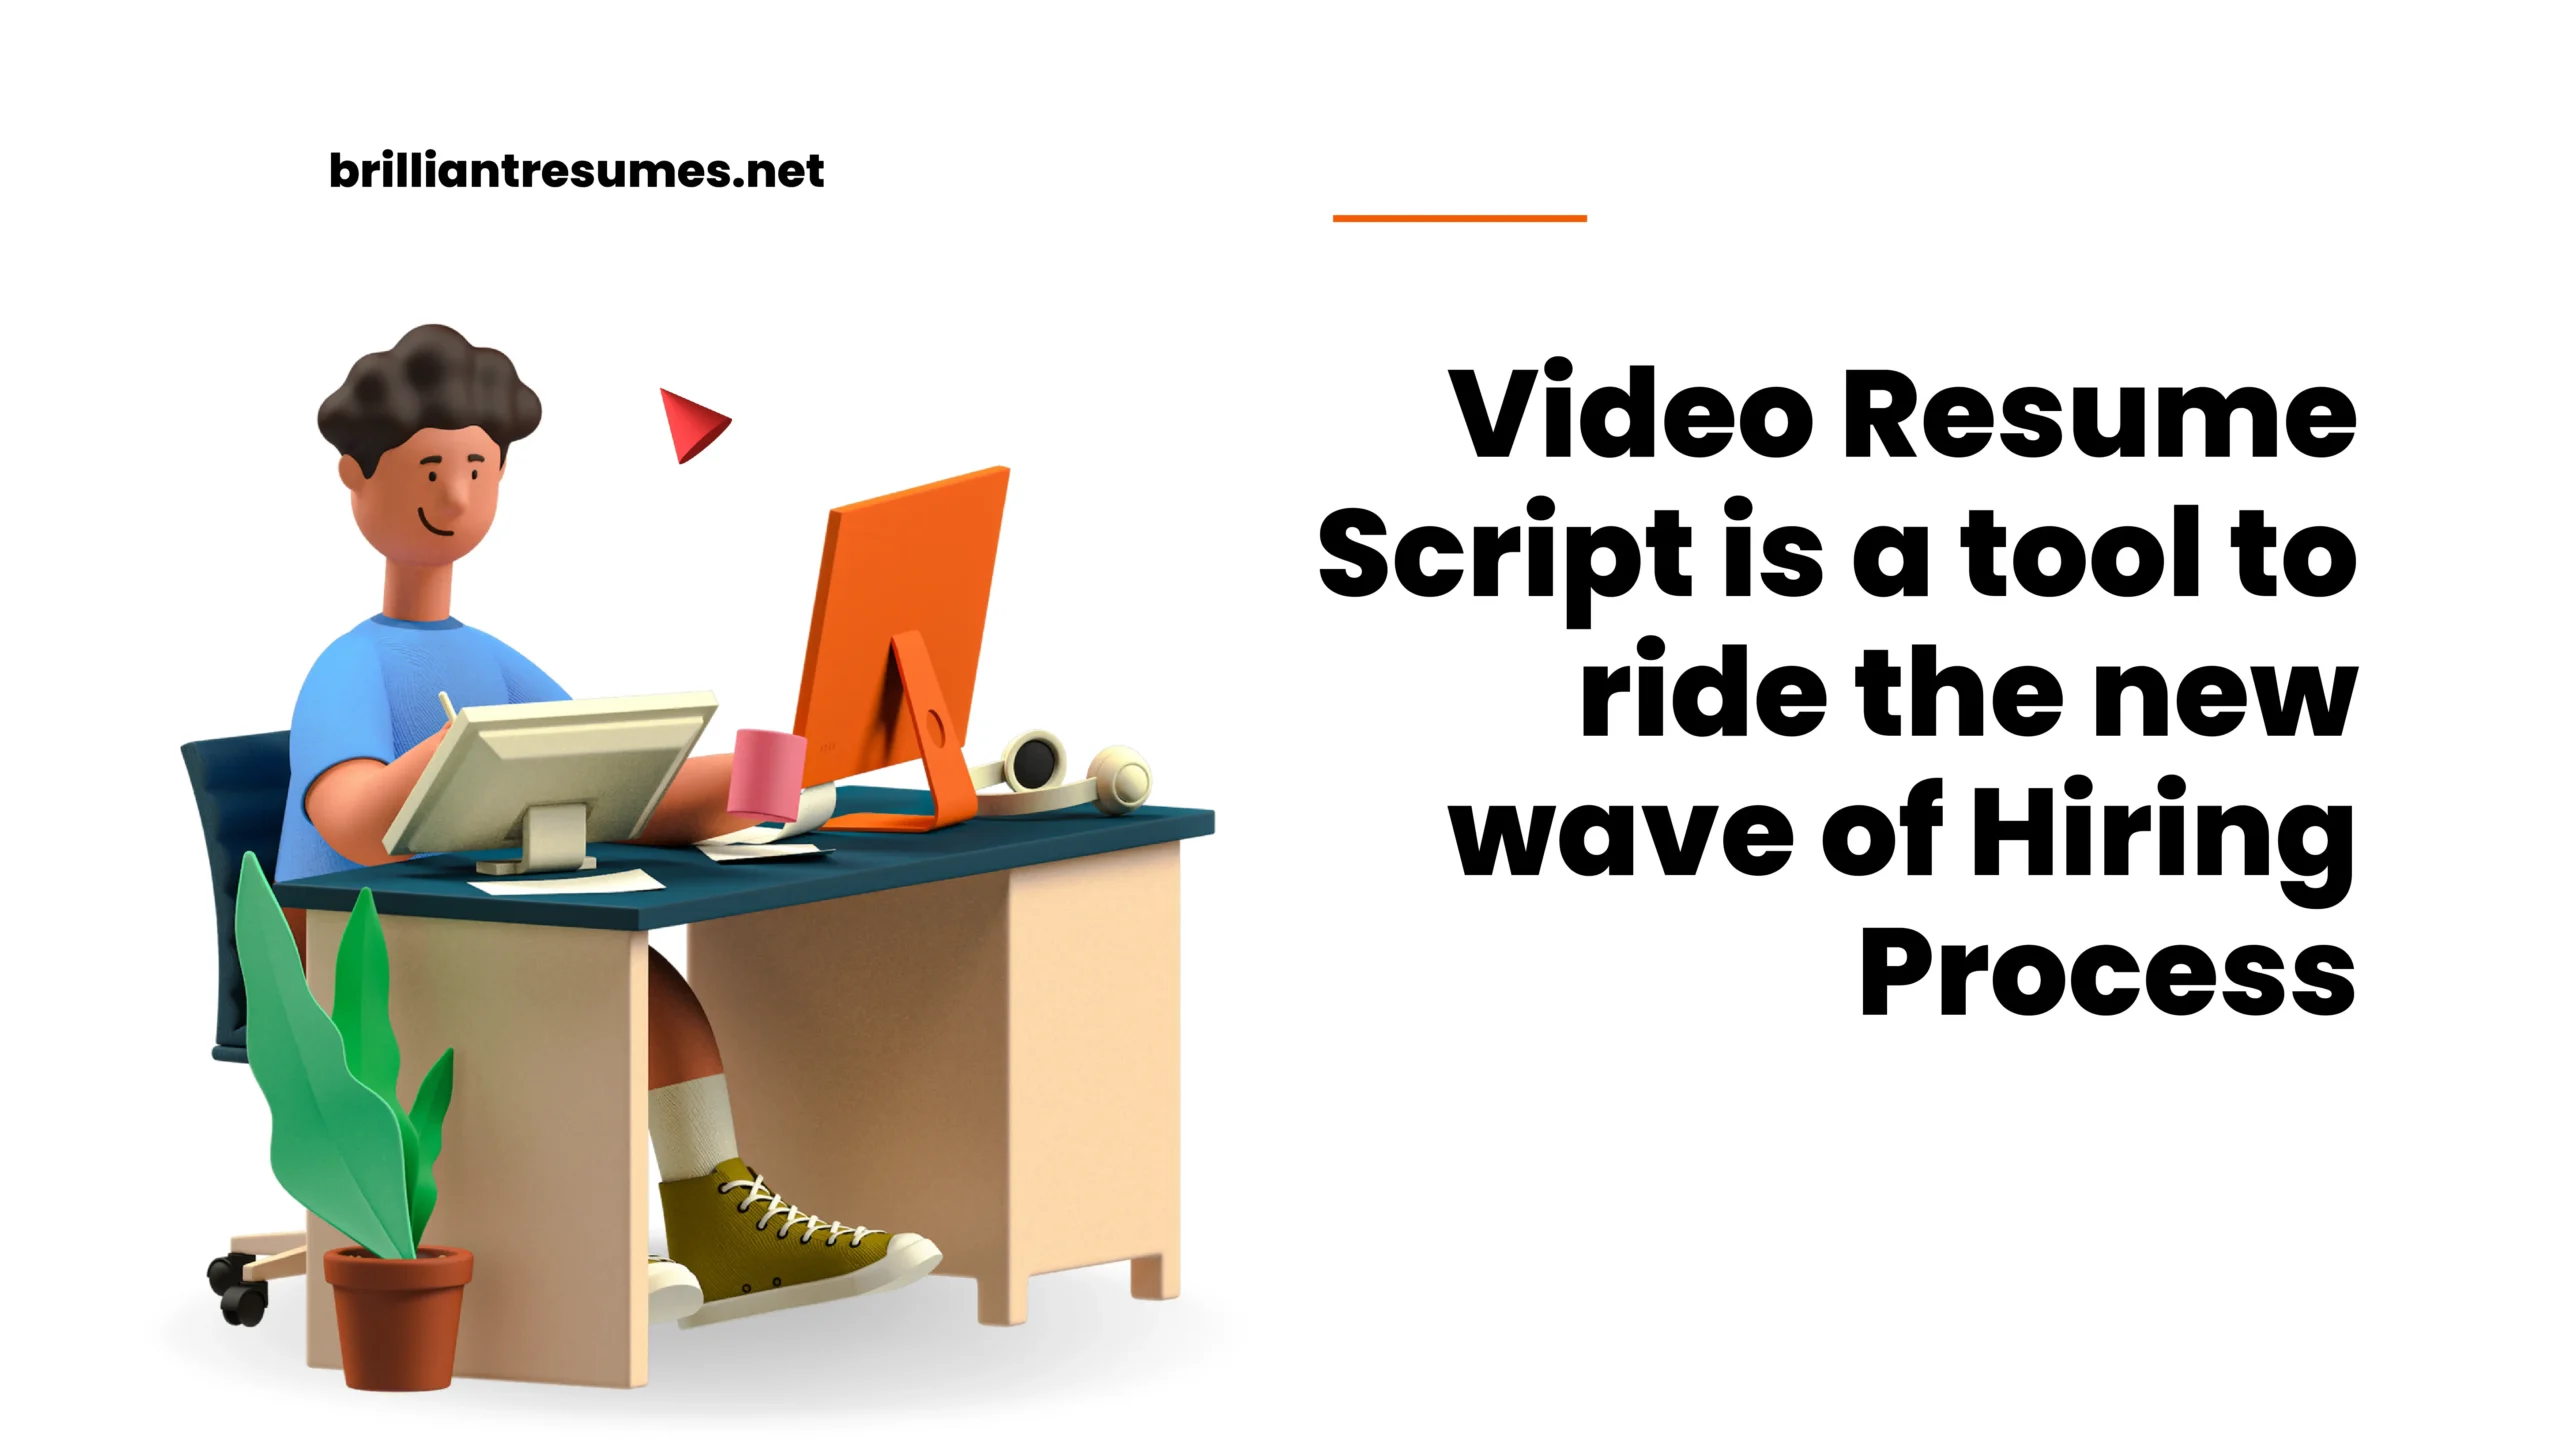 Video Resume Script is a Tool to Ride the New Wave of Hiring Process